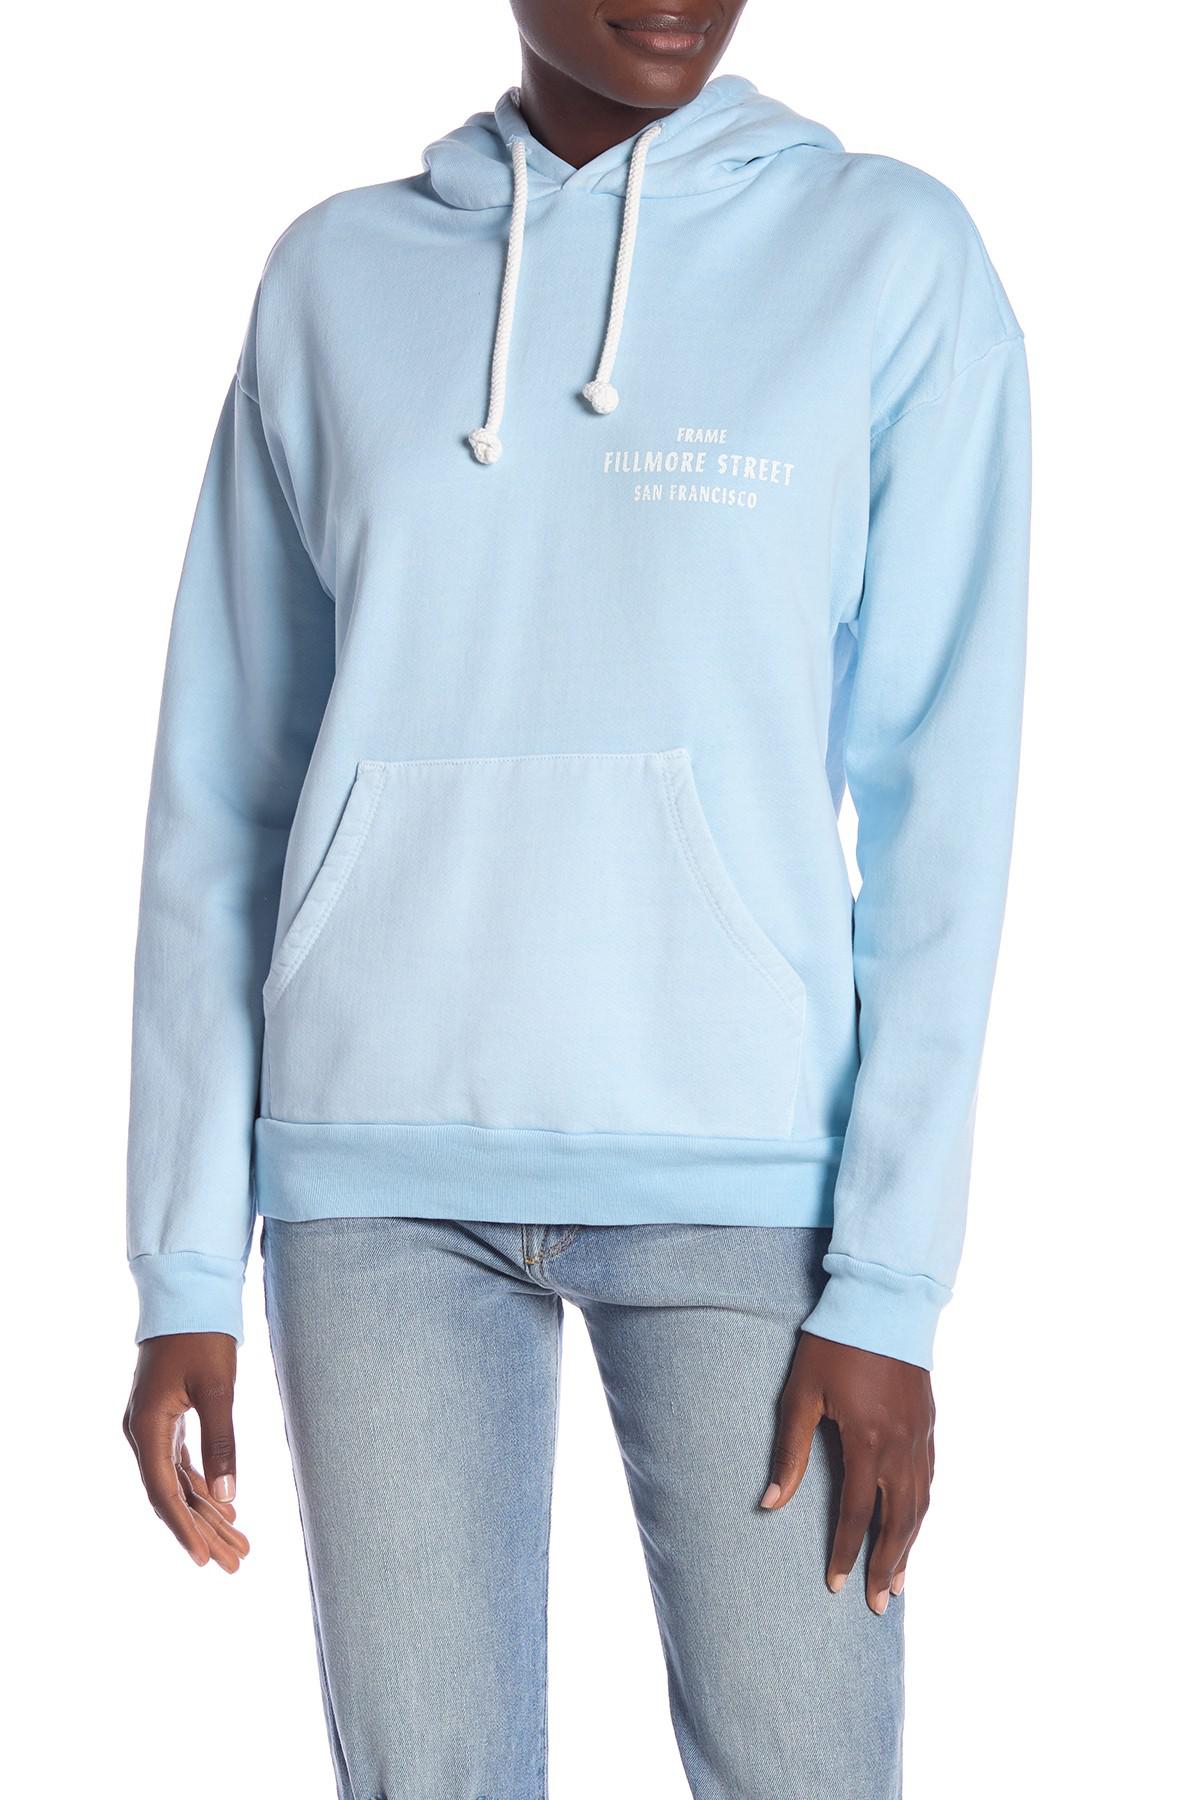 FRAME Cotton Oversized Hoodie in Faded Light Blue (Blue) - Lyst